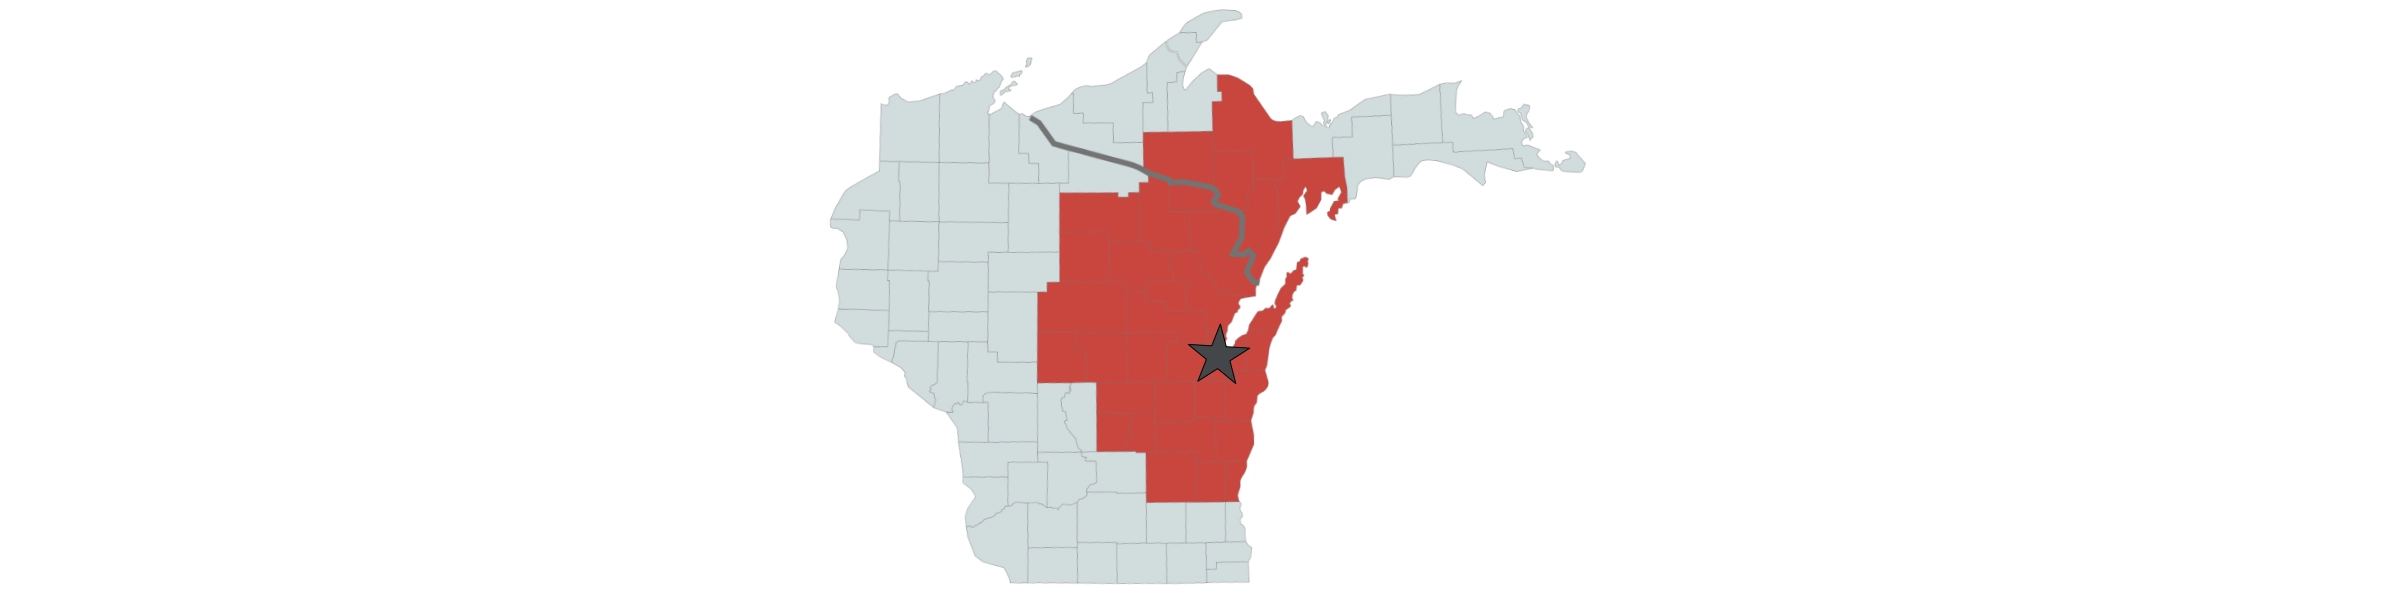 Baril Engine's pickup and delivery service map encompassing 28 counties in Wisconsin and Michigan's Upper Peninsula.